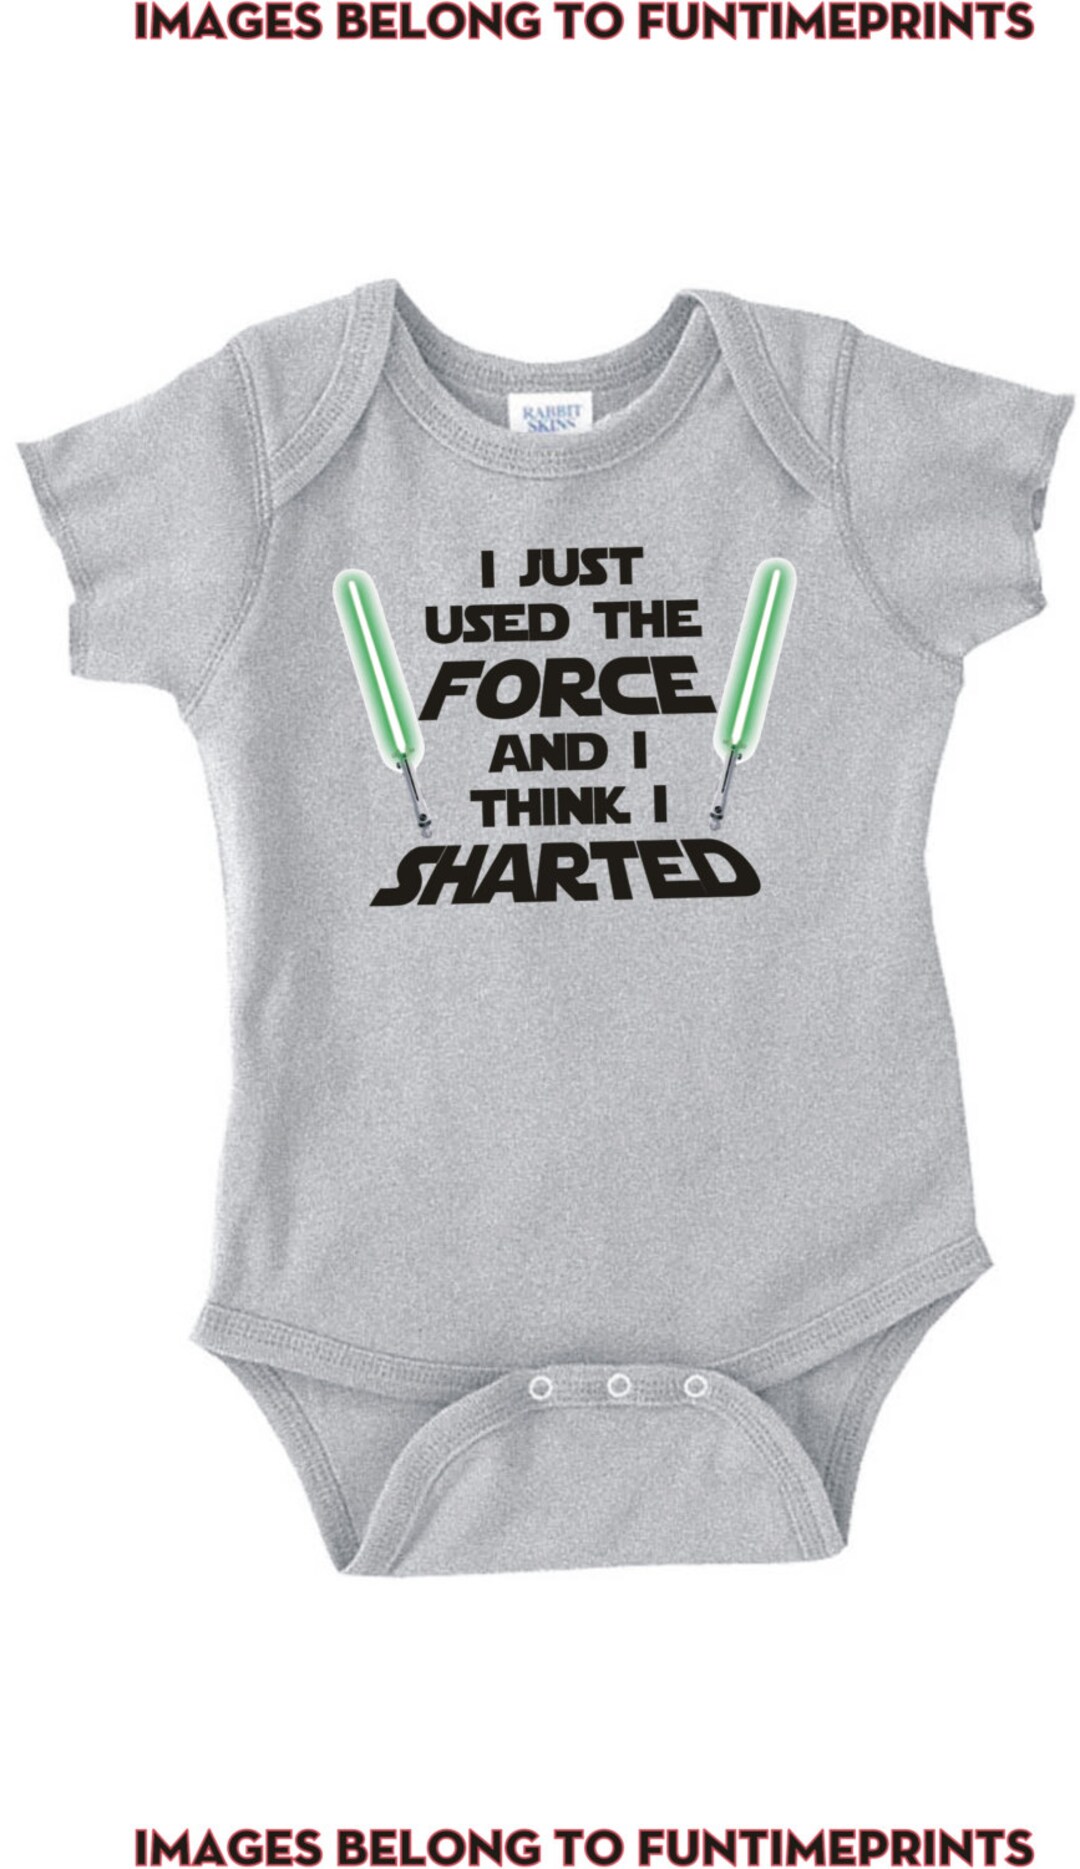 I Just Used the Force and I Think I Sharted funny T-shirt - Etsy